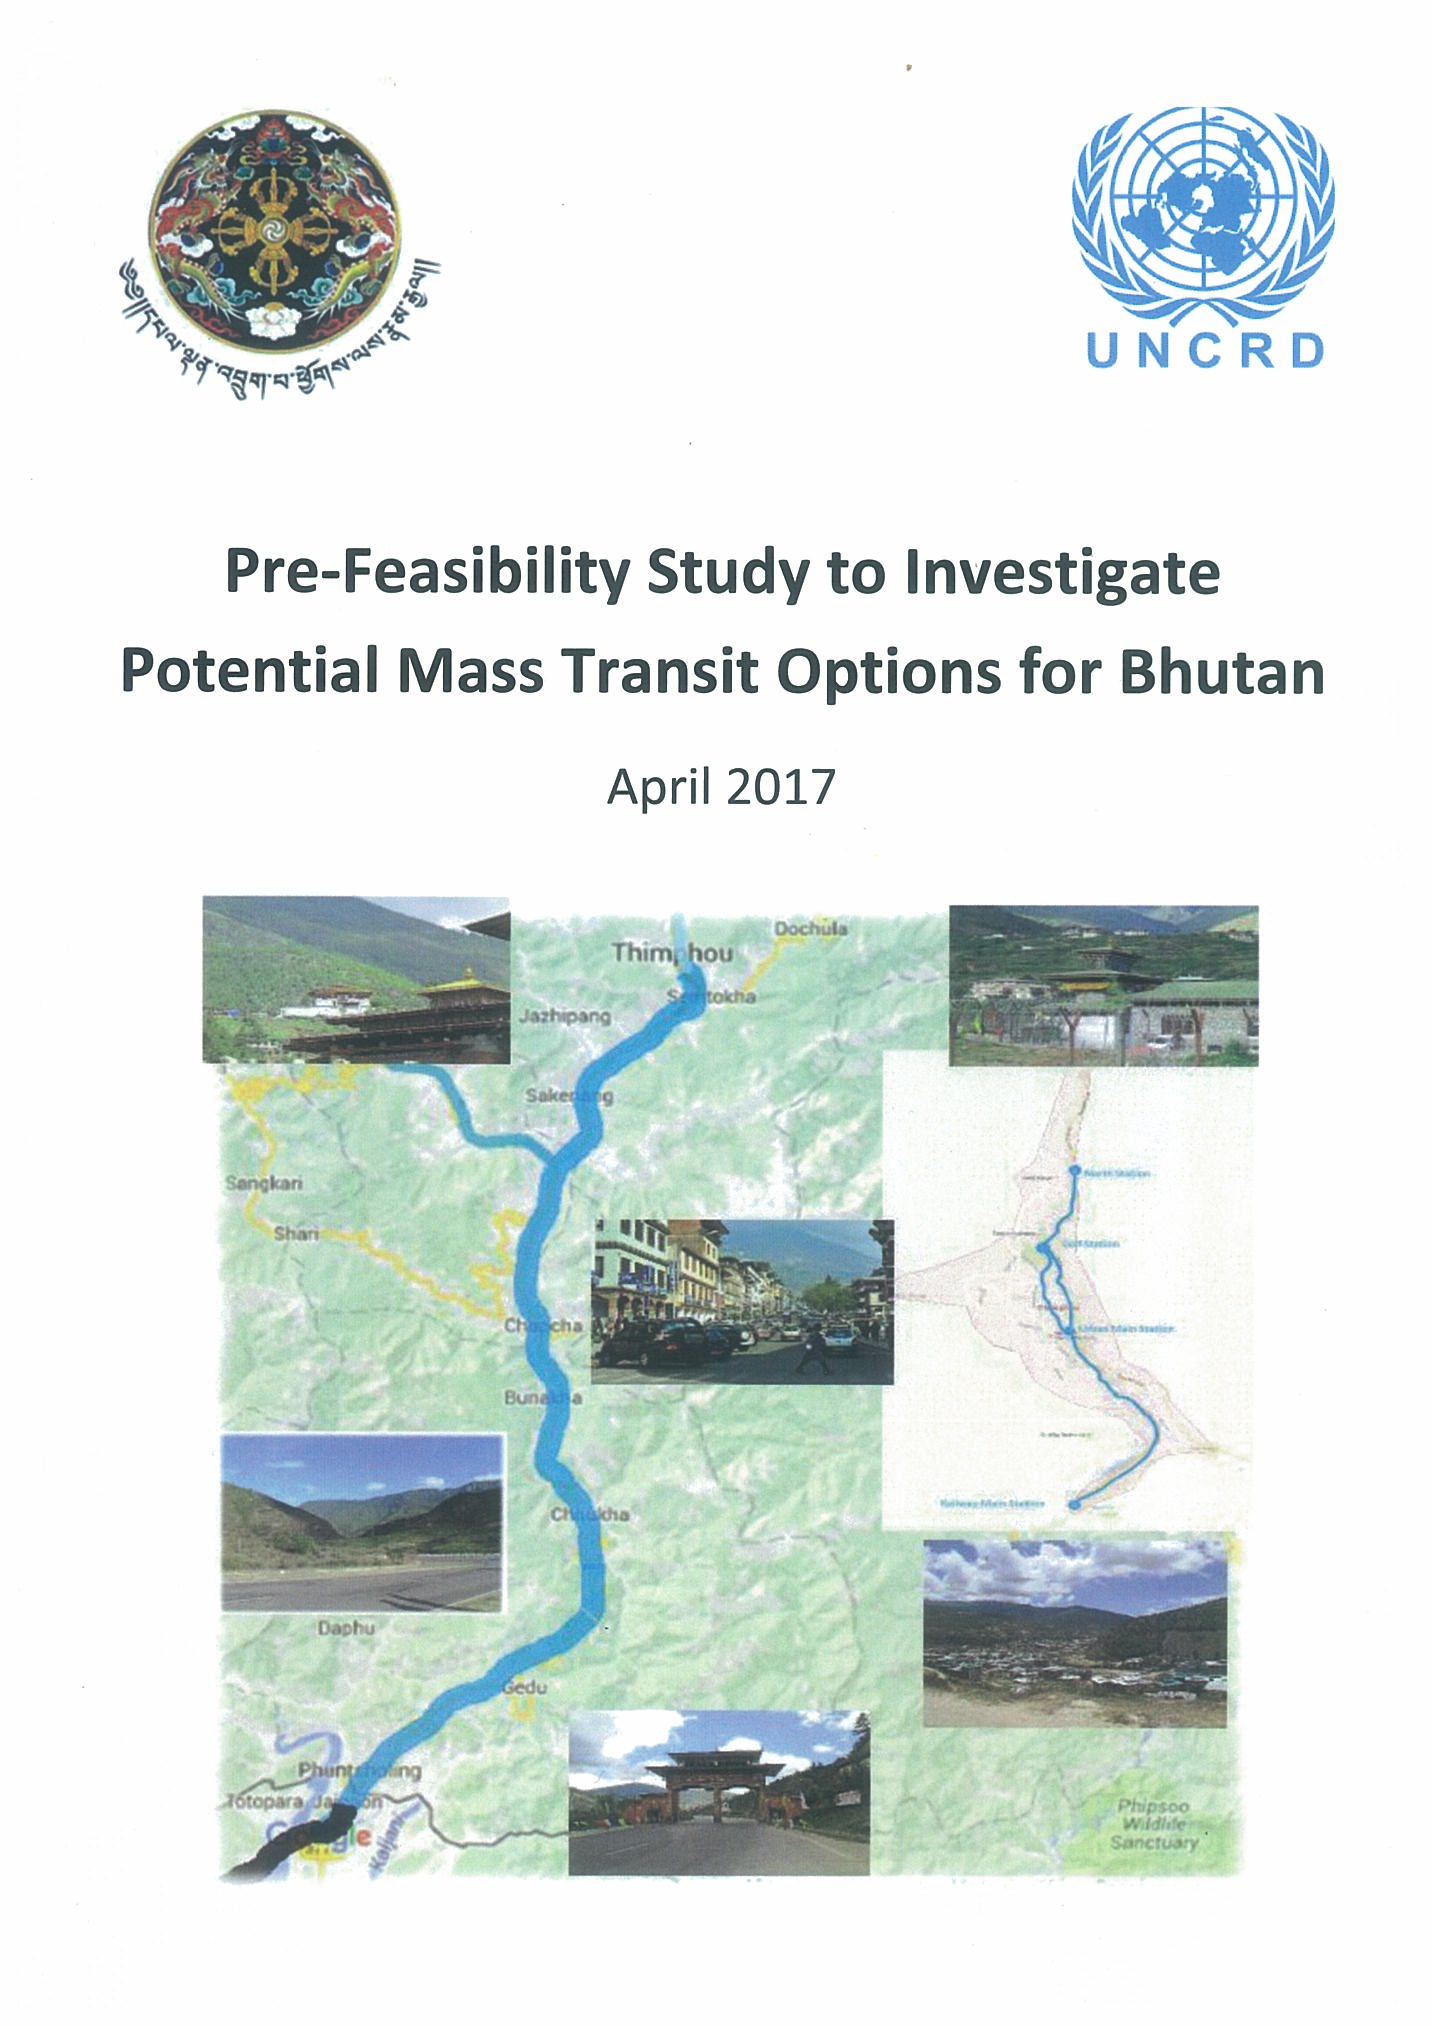 Cover of the report, Pre-Feasibility Study to Investigate Potential Mass Transit Options for Bhutan